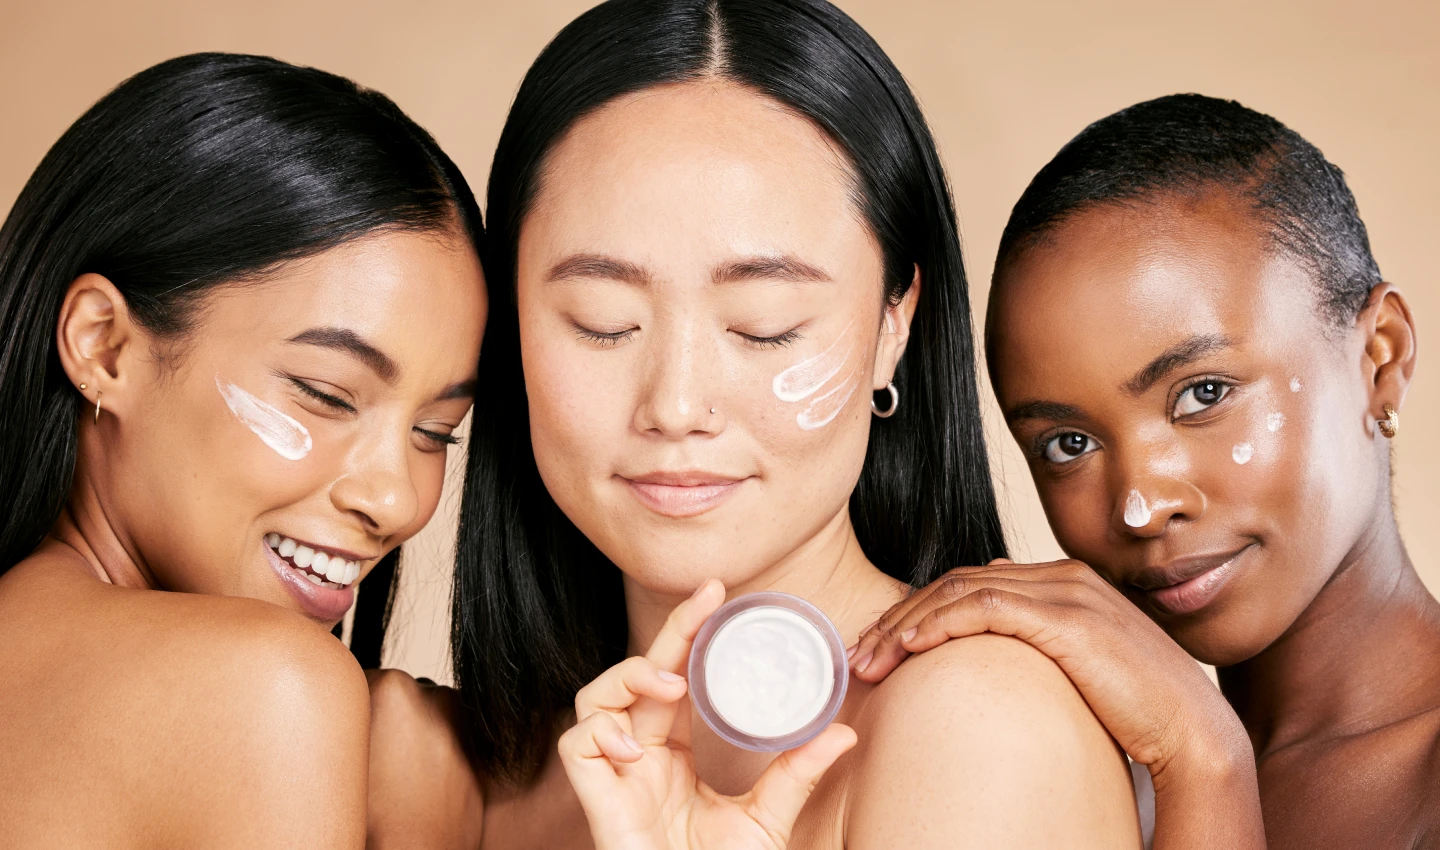 Three women of different skin colors and ethnicities holding up and trying on different foundation shades to find their perfect match